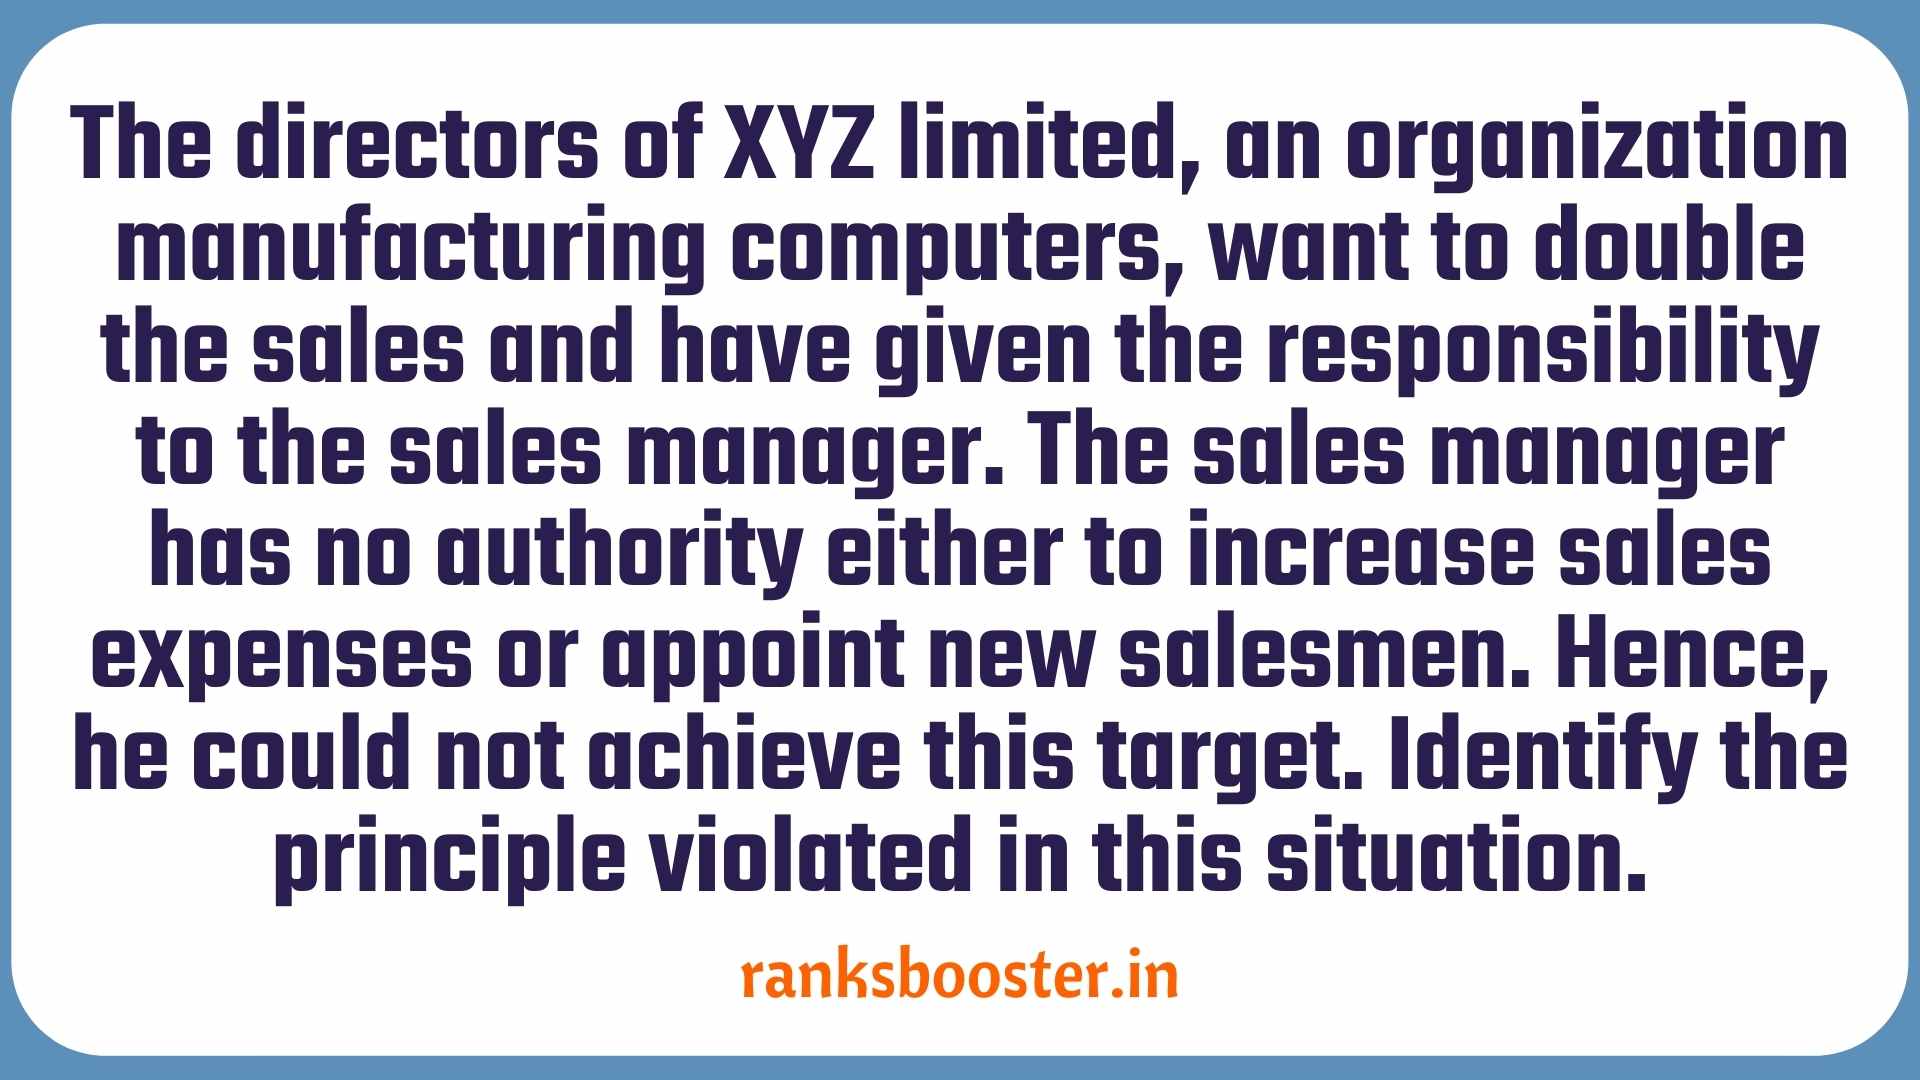 The directors of XYZ limited, an organization manufacturing computers, want to double the sales and have given the responsibility to the sales manager